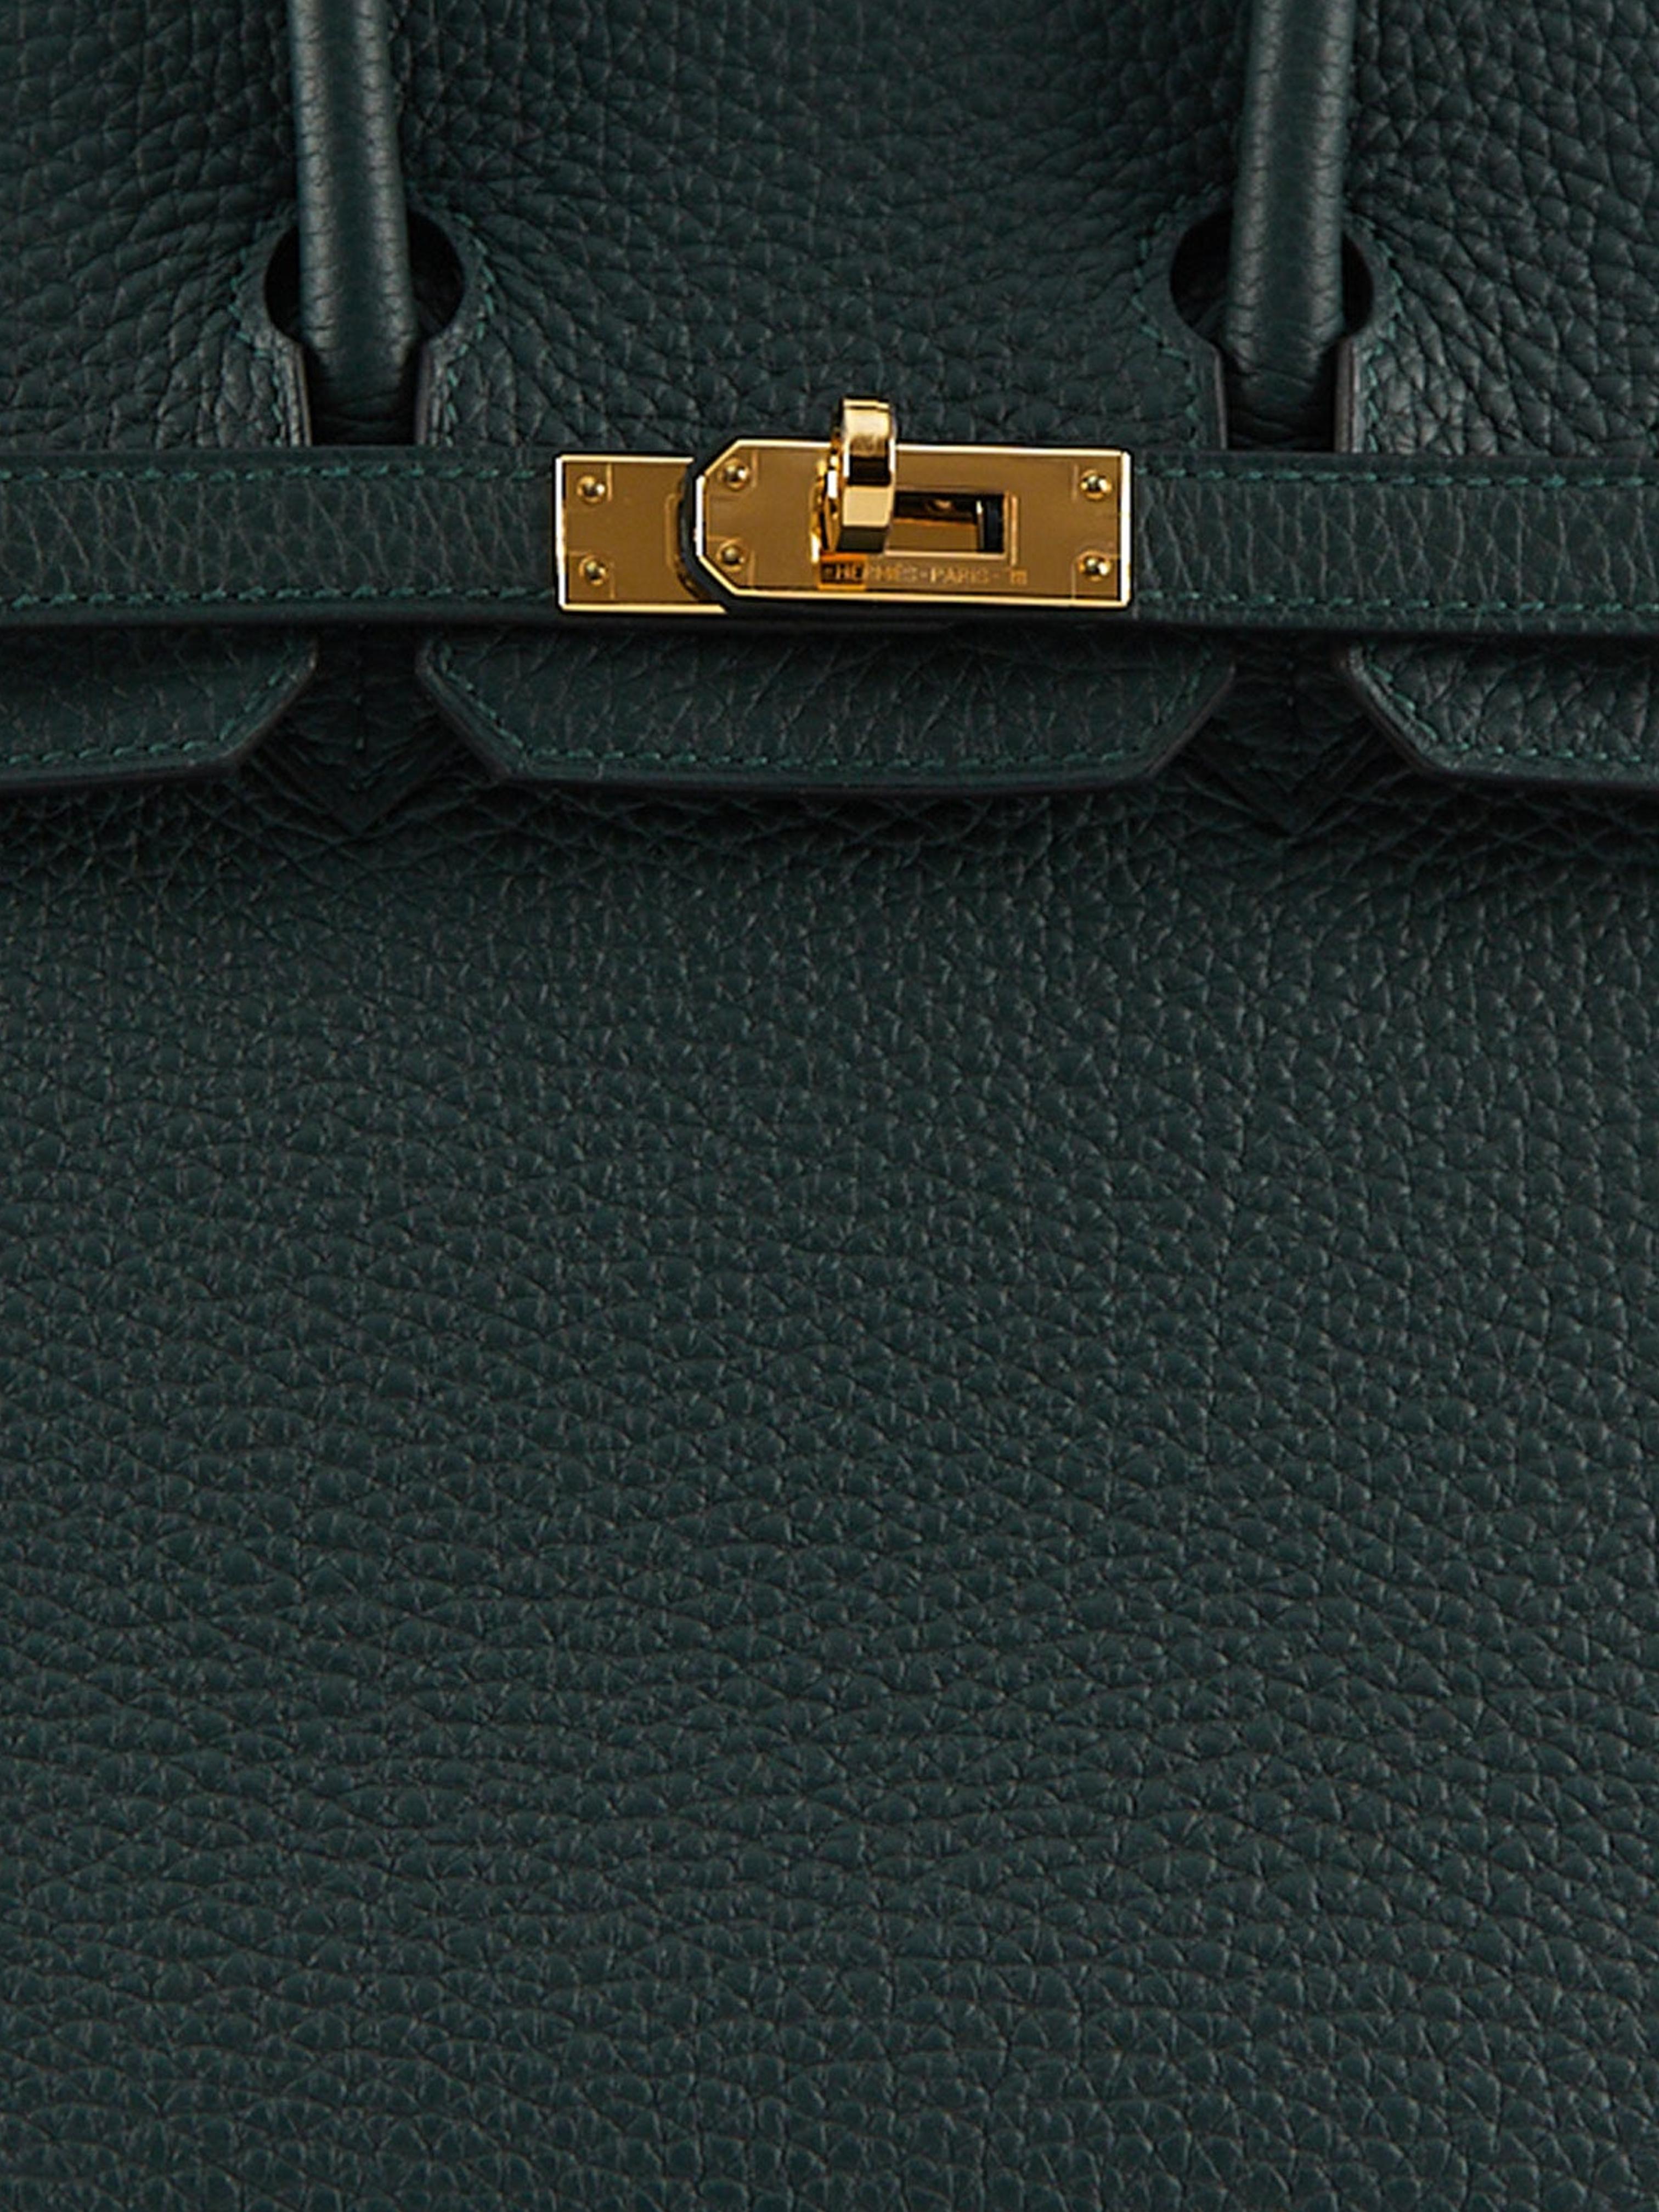 HERMÈS BIRKIN 25CM VERT CYPRESS Togo Leather with Gold Hardware Regular price In Excellent Condition For Sale In London, GB